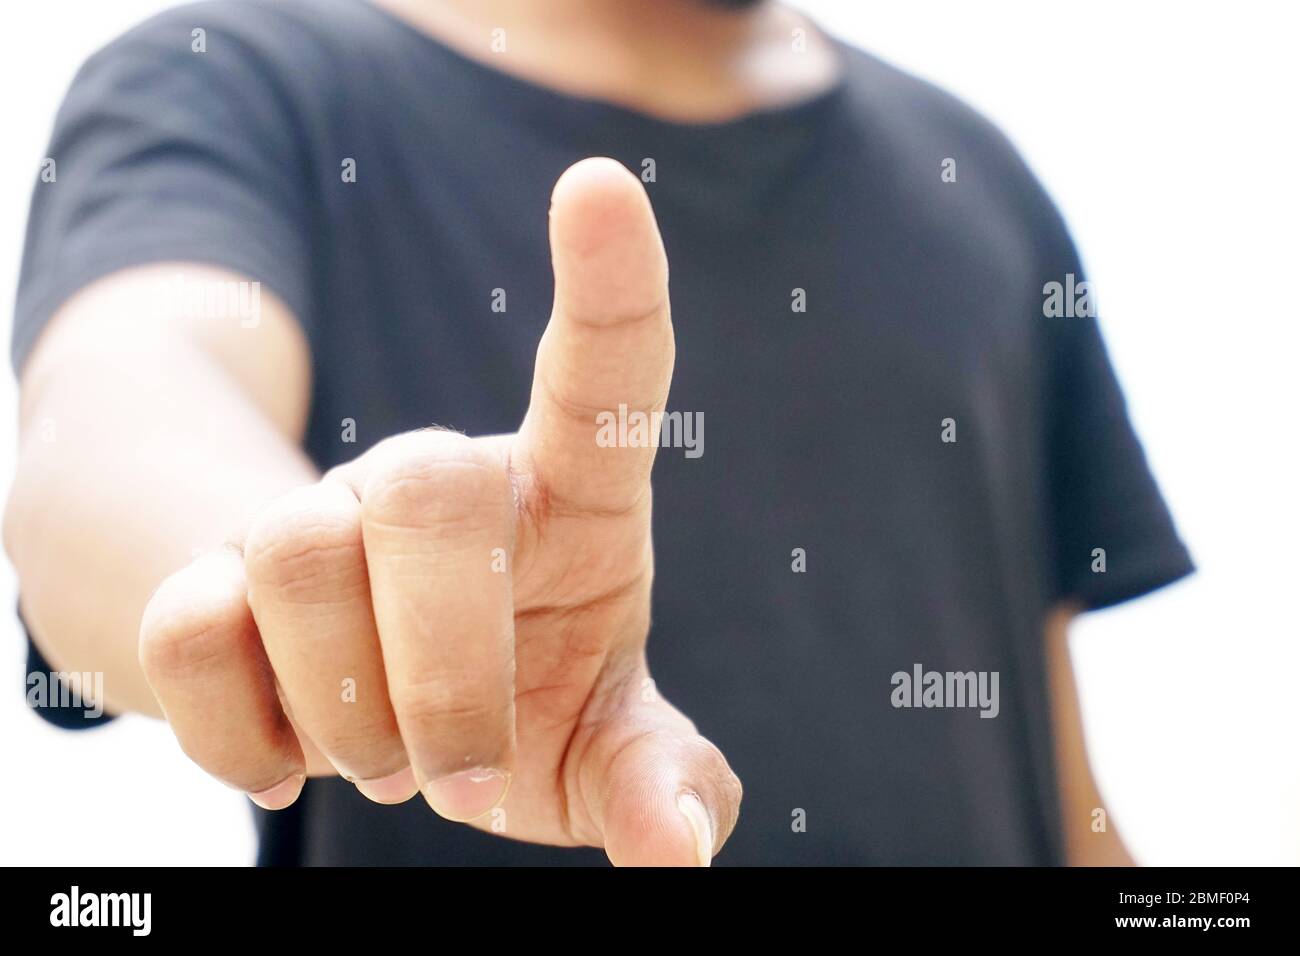 business man showing hand signal Stock Photo